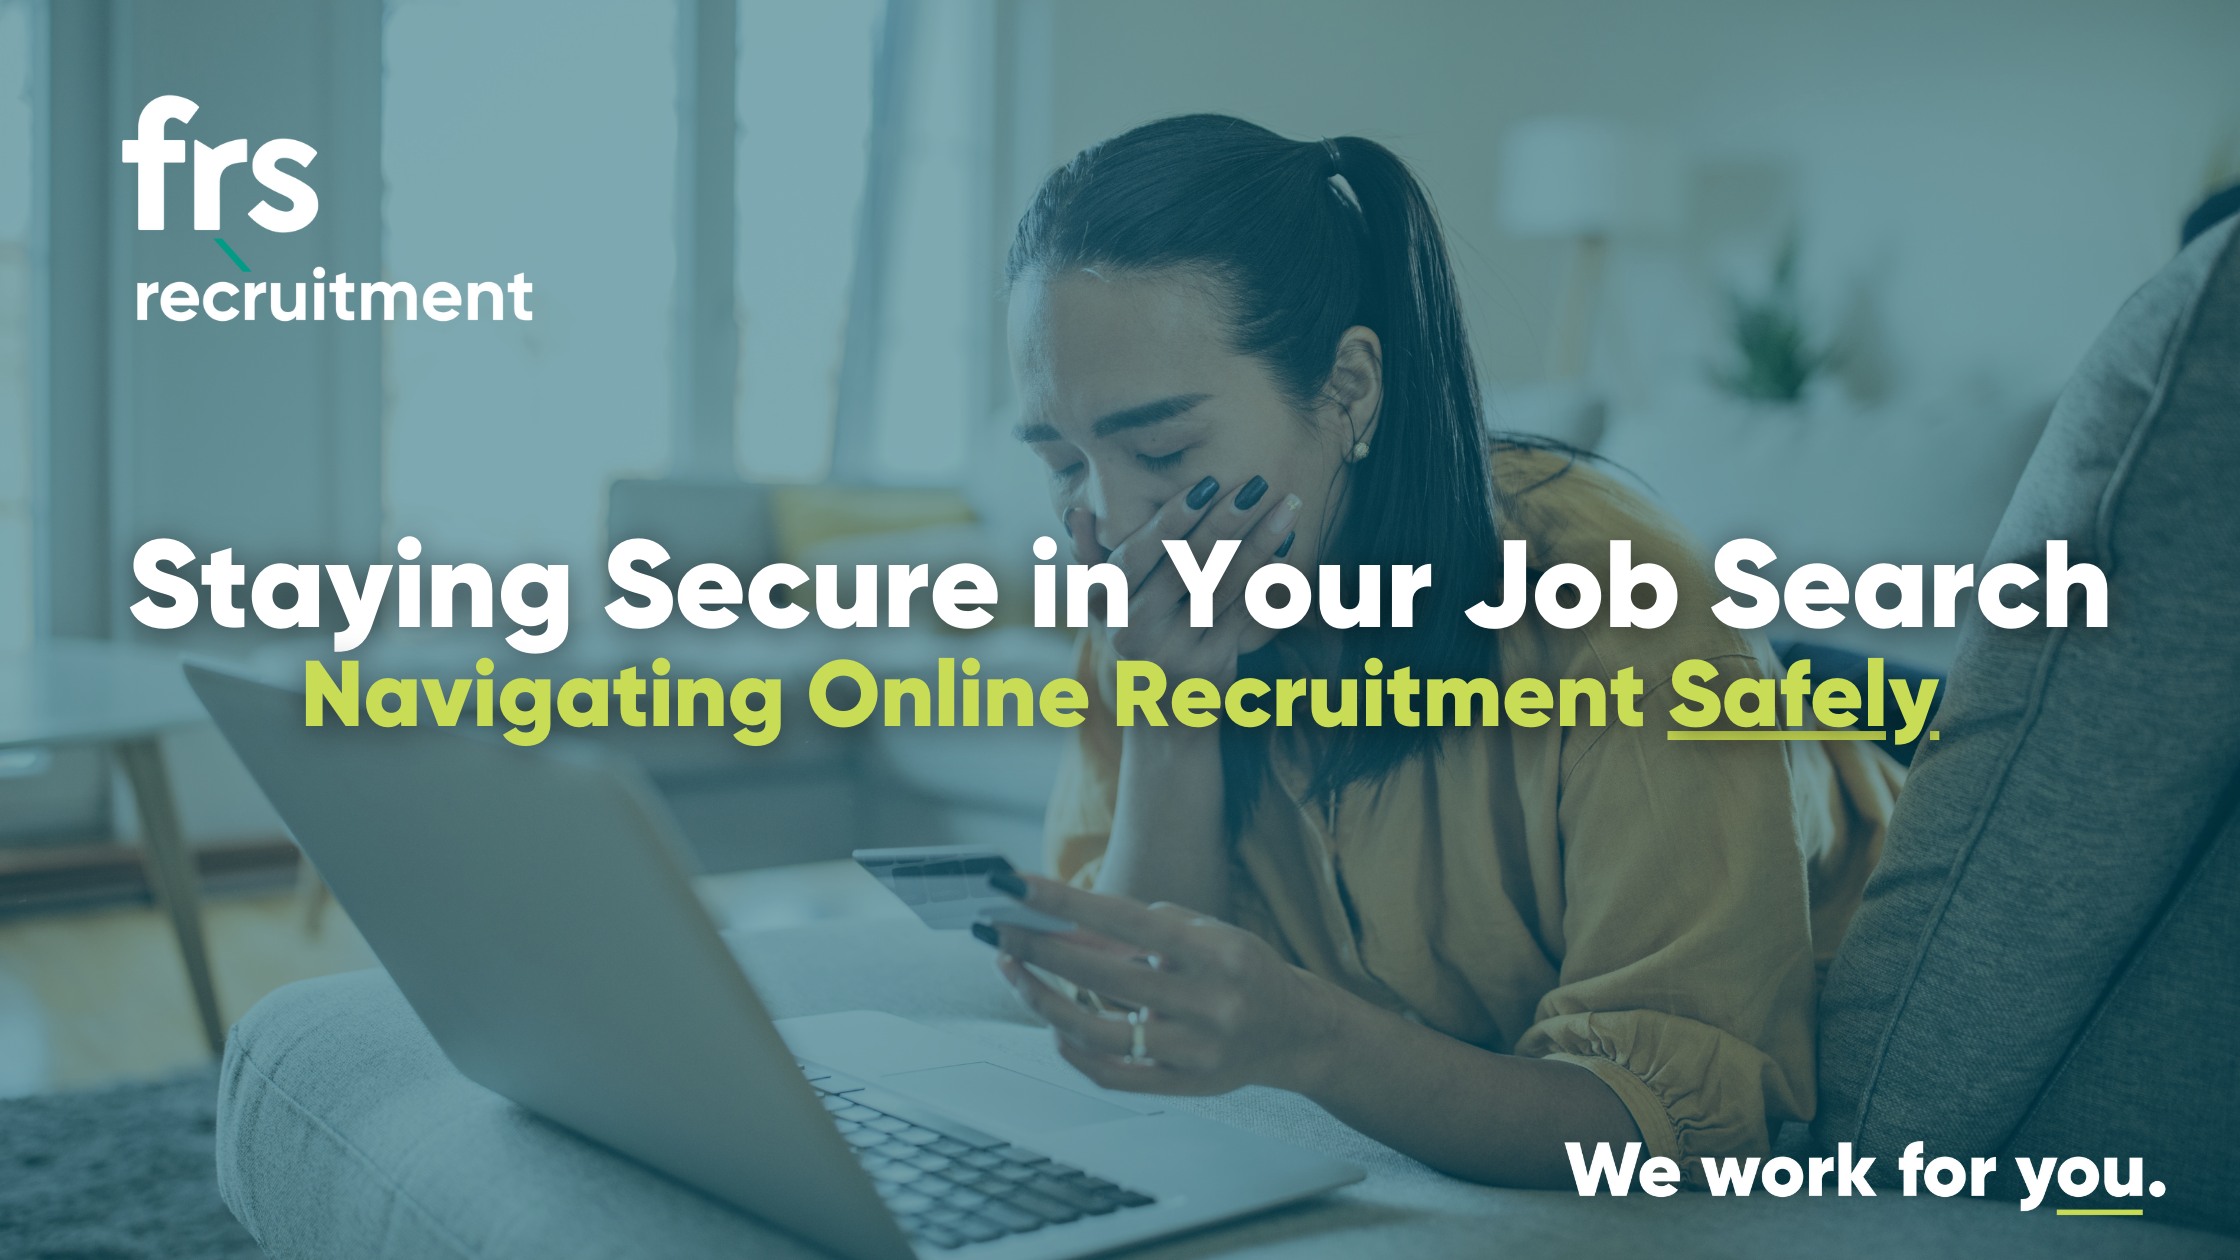 Staying Secure in Your Job Search - Navigating Online Recruitment Safely